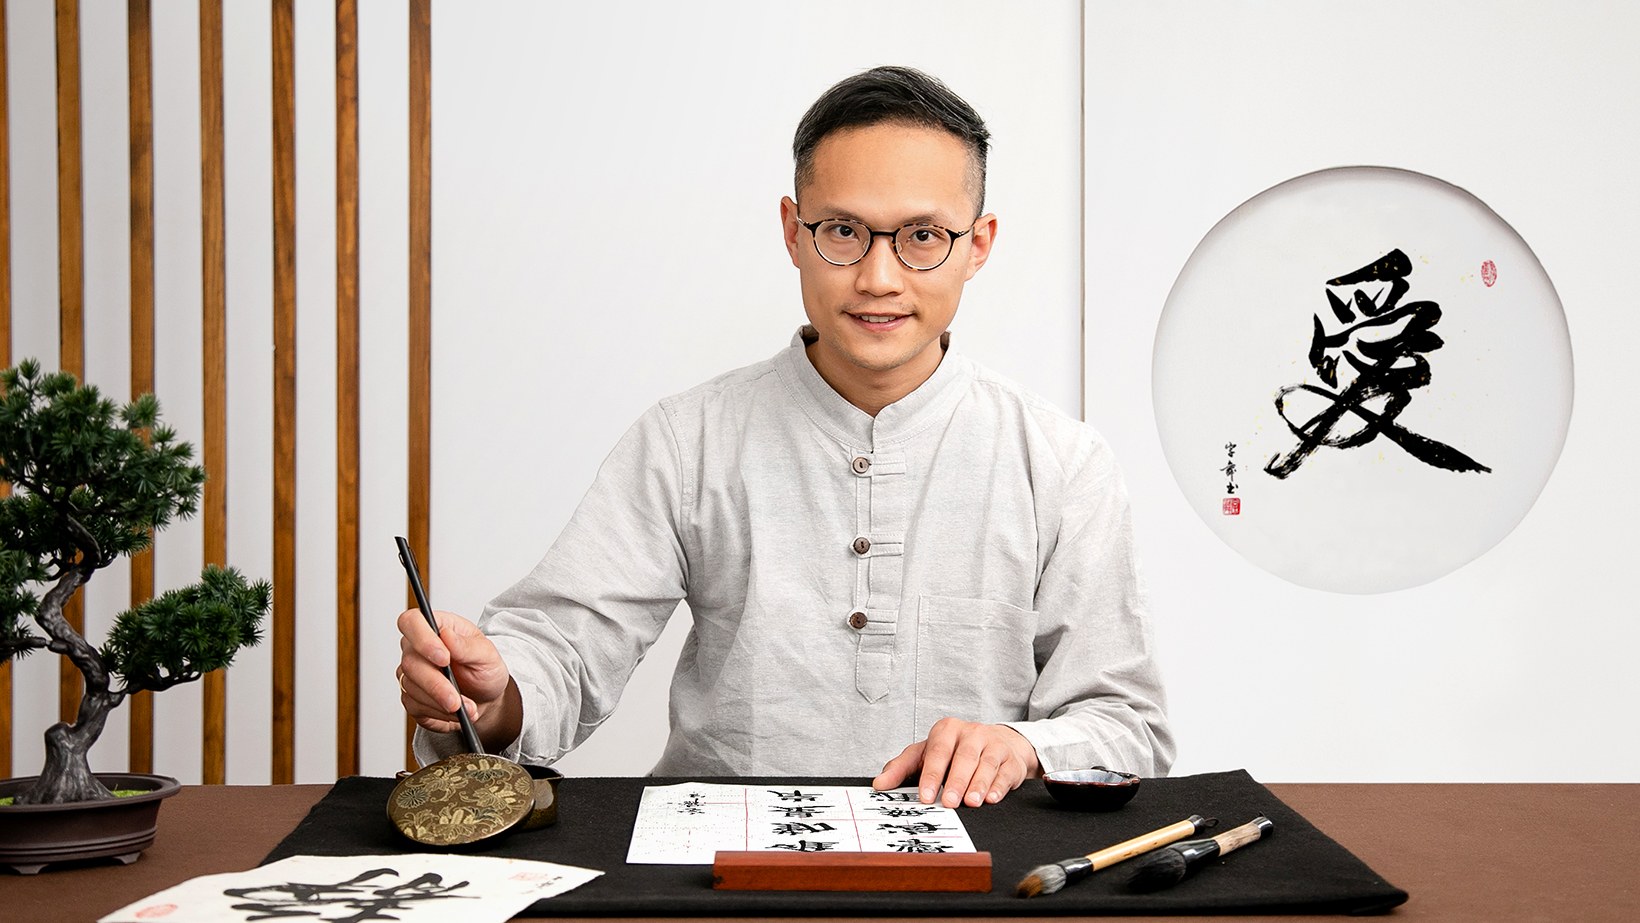 Chinese Calligraphy Video Tutorial